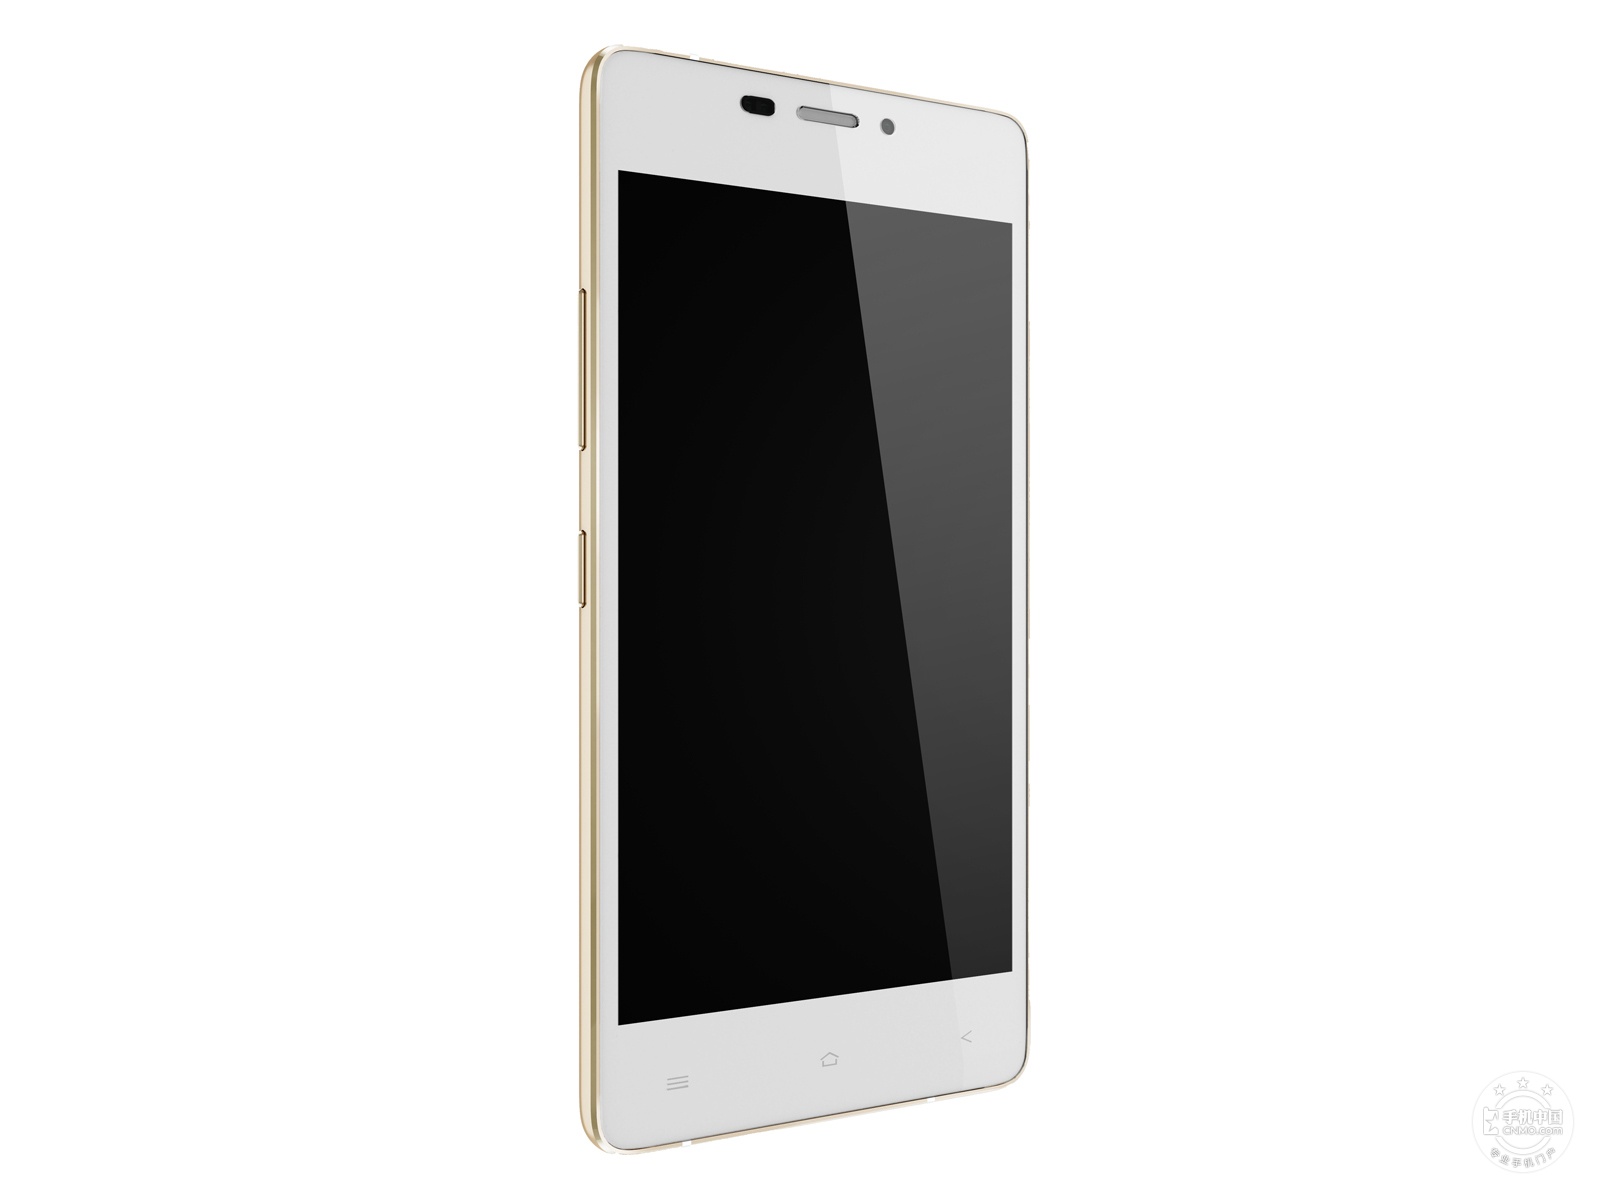 Gionee-Elife-S5.1-22